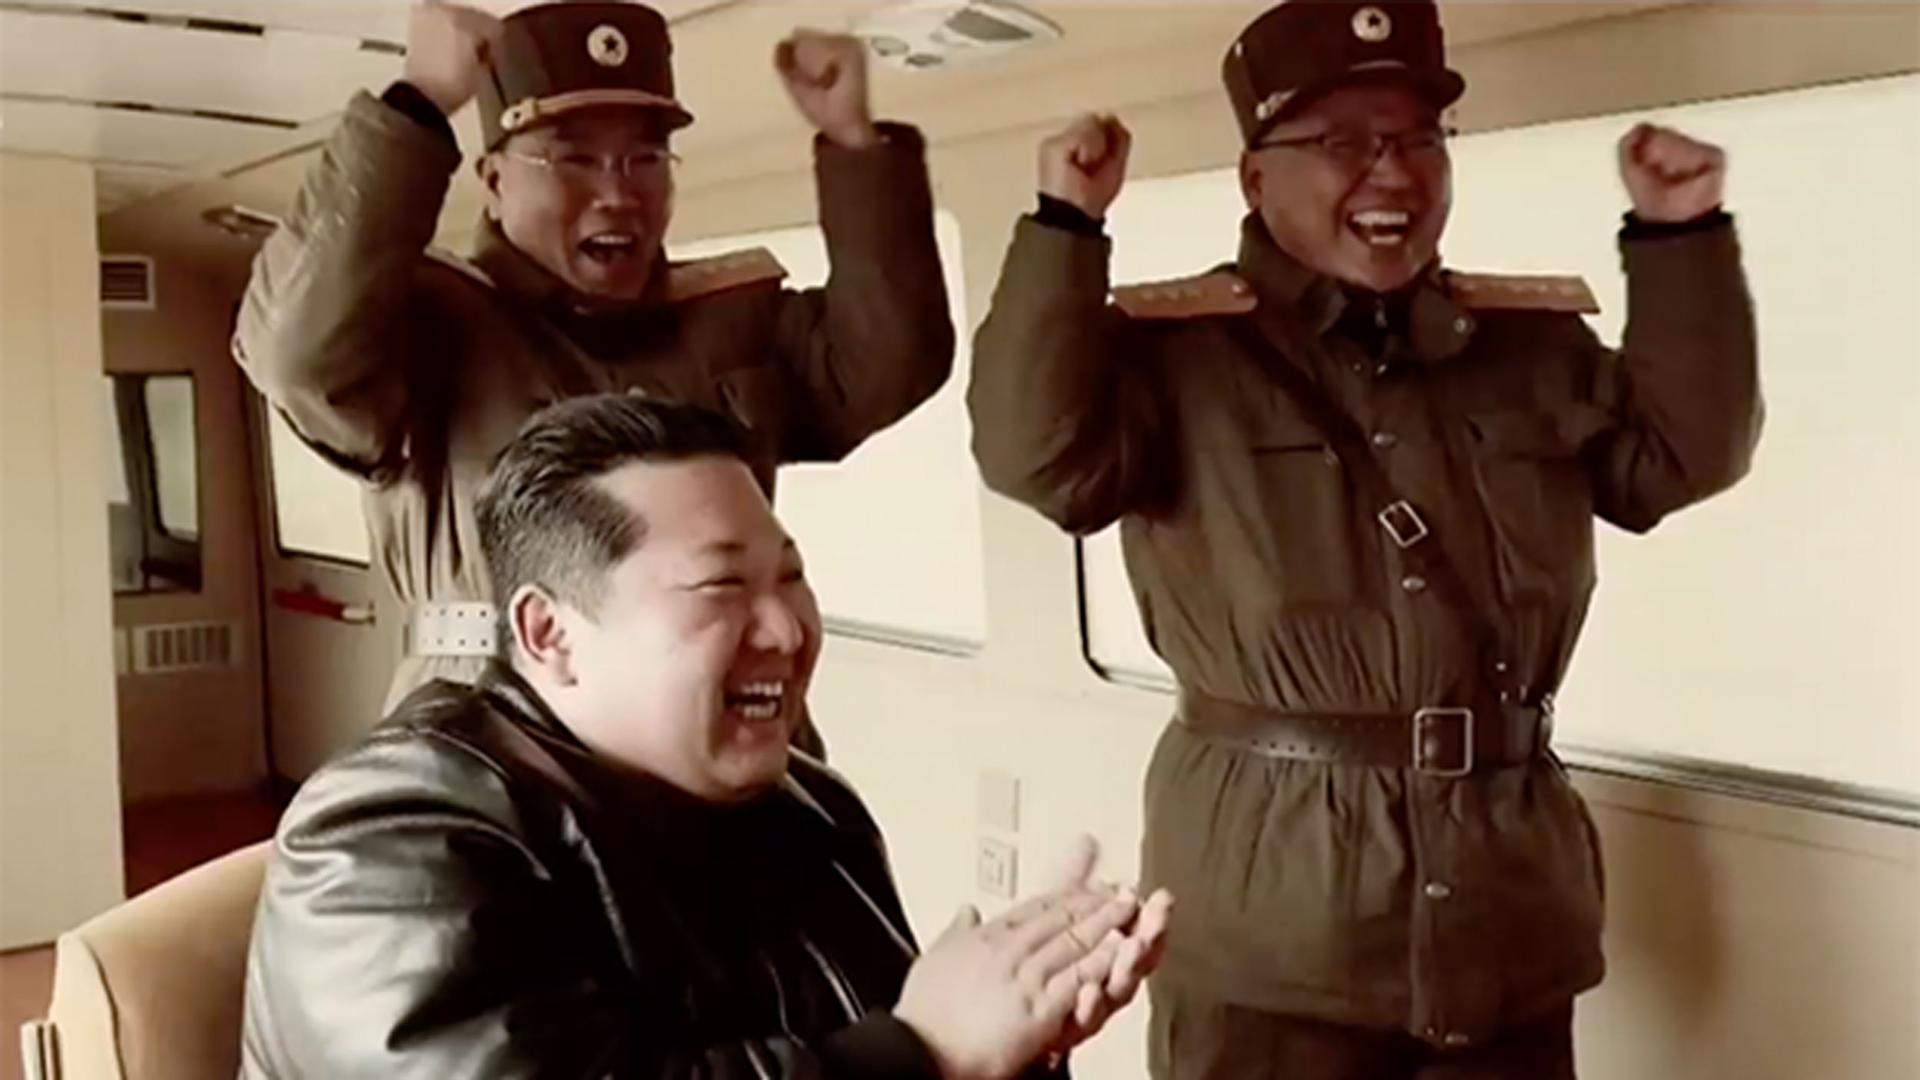 Kim Jong-un and his generals cheer after the apparent launch of the Hwasong-17 long-range missile in March